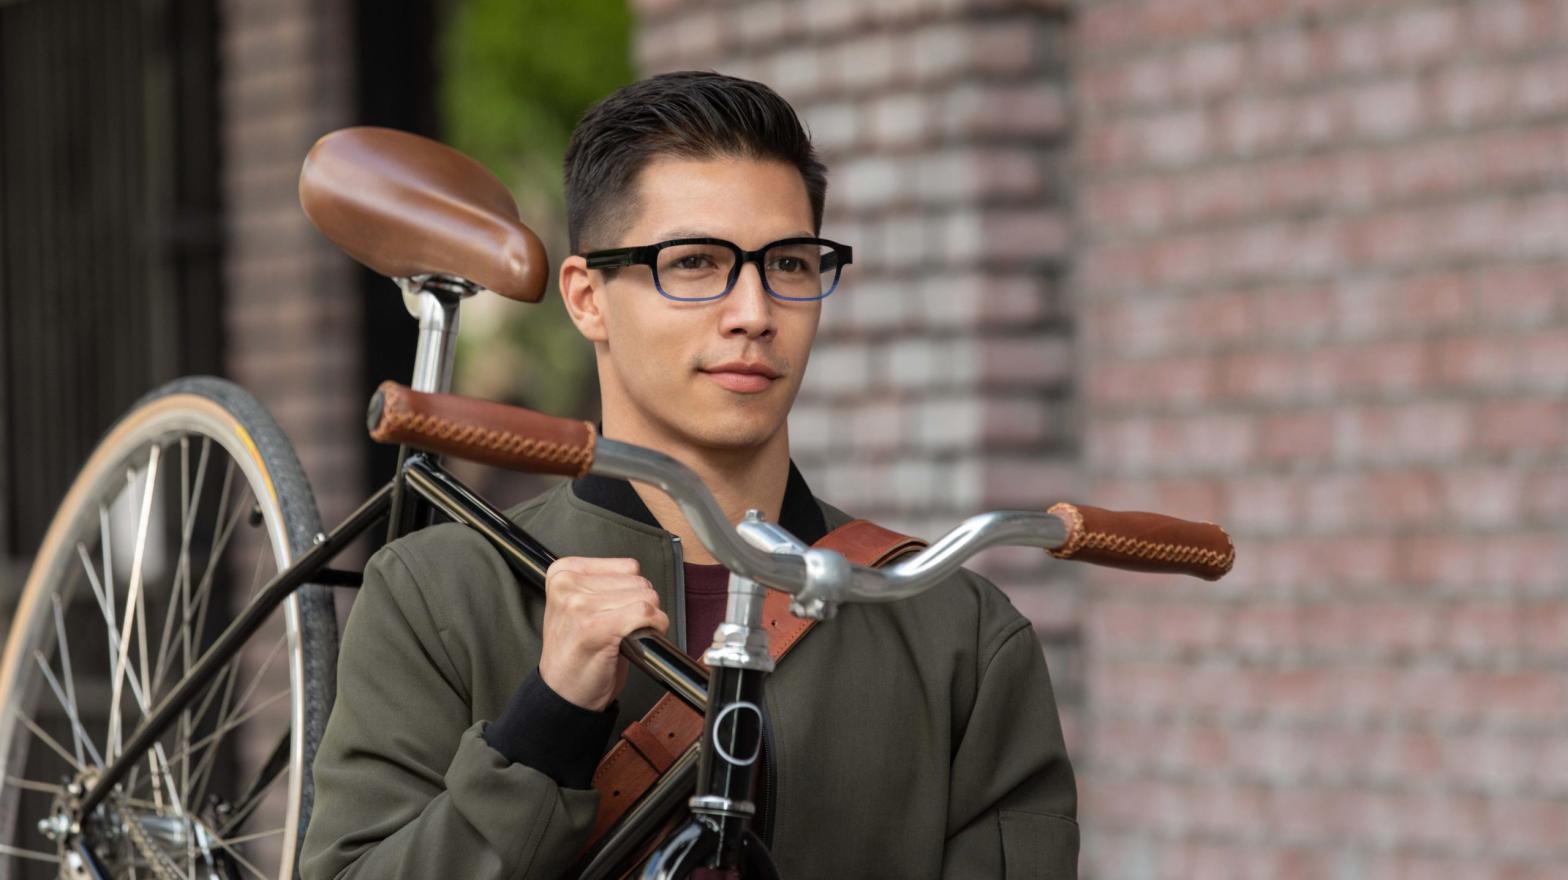 I don't know why Amazon decided a guy carrying a bike while wearing Echo Frames is the way to go for product shots, but here we are. (Image: Amazon)